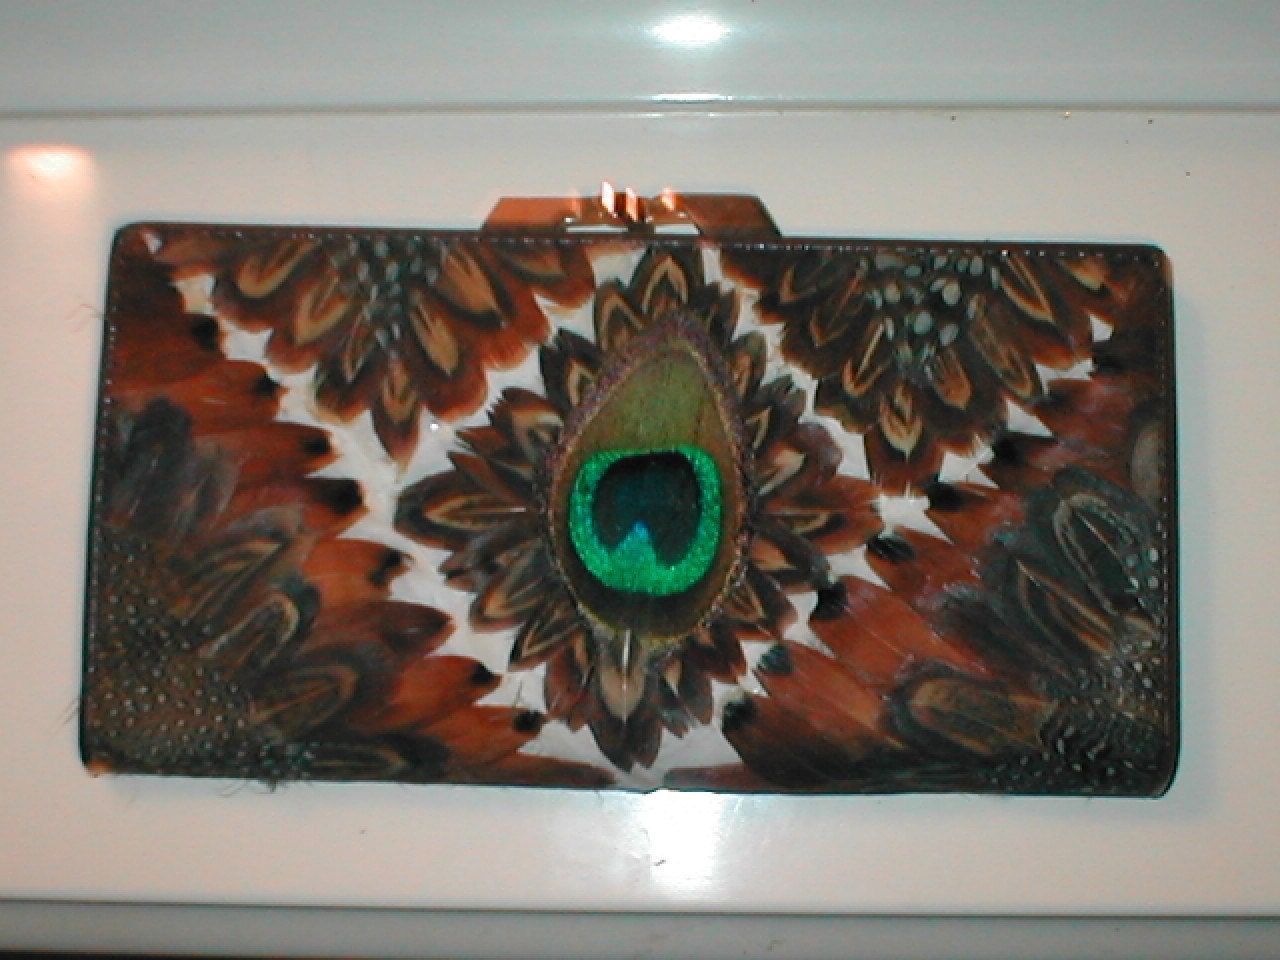 Vintage Peacock Feather Clutch Purse by yesteryearglam on Etsy